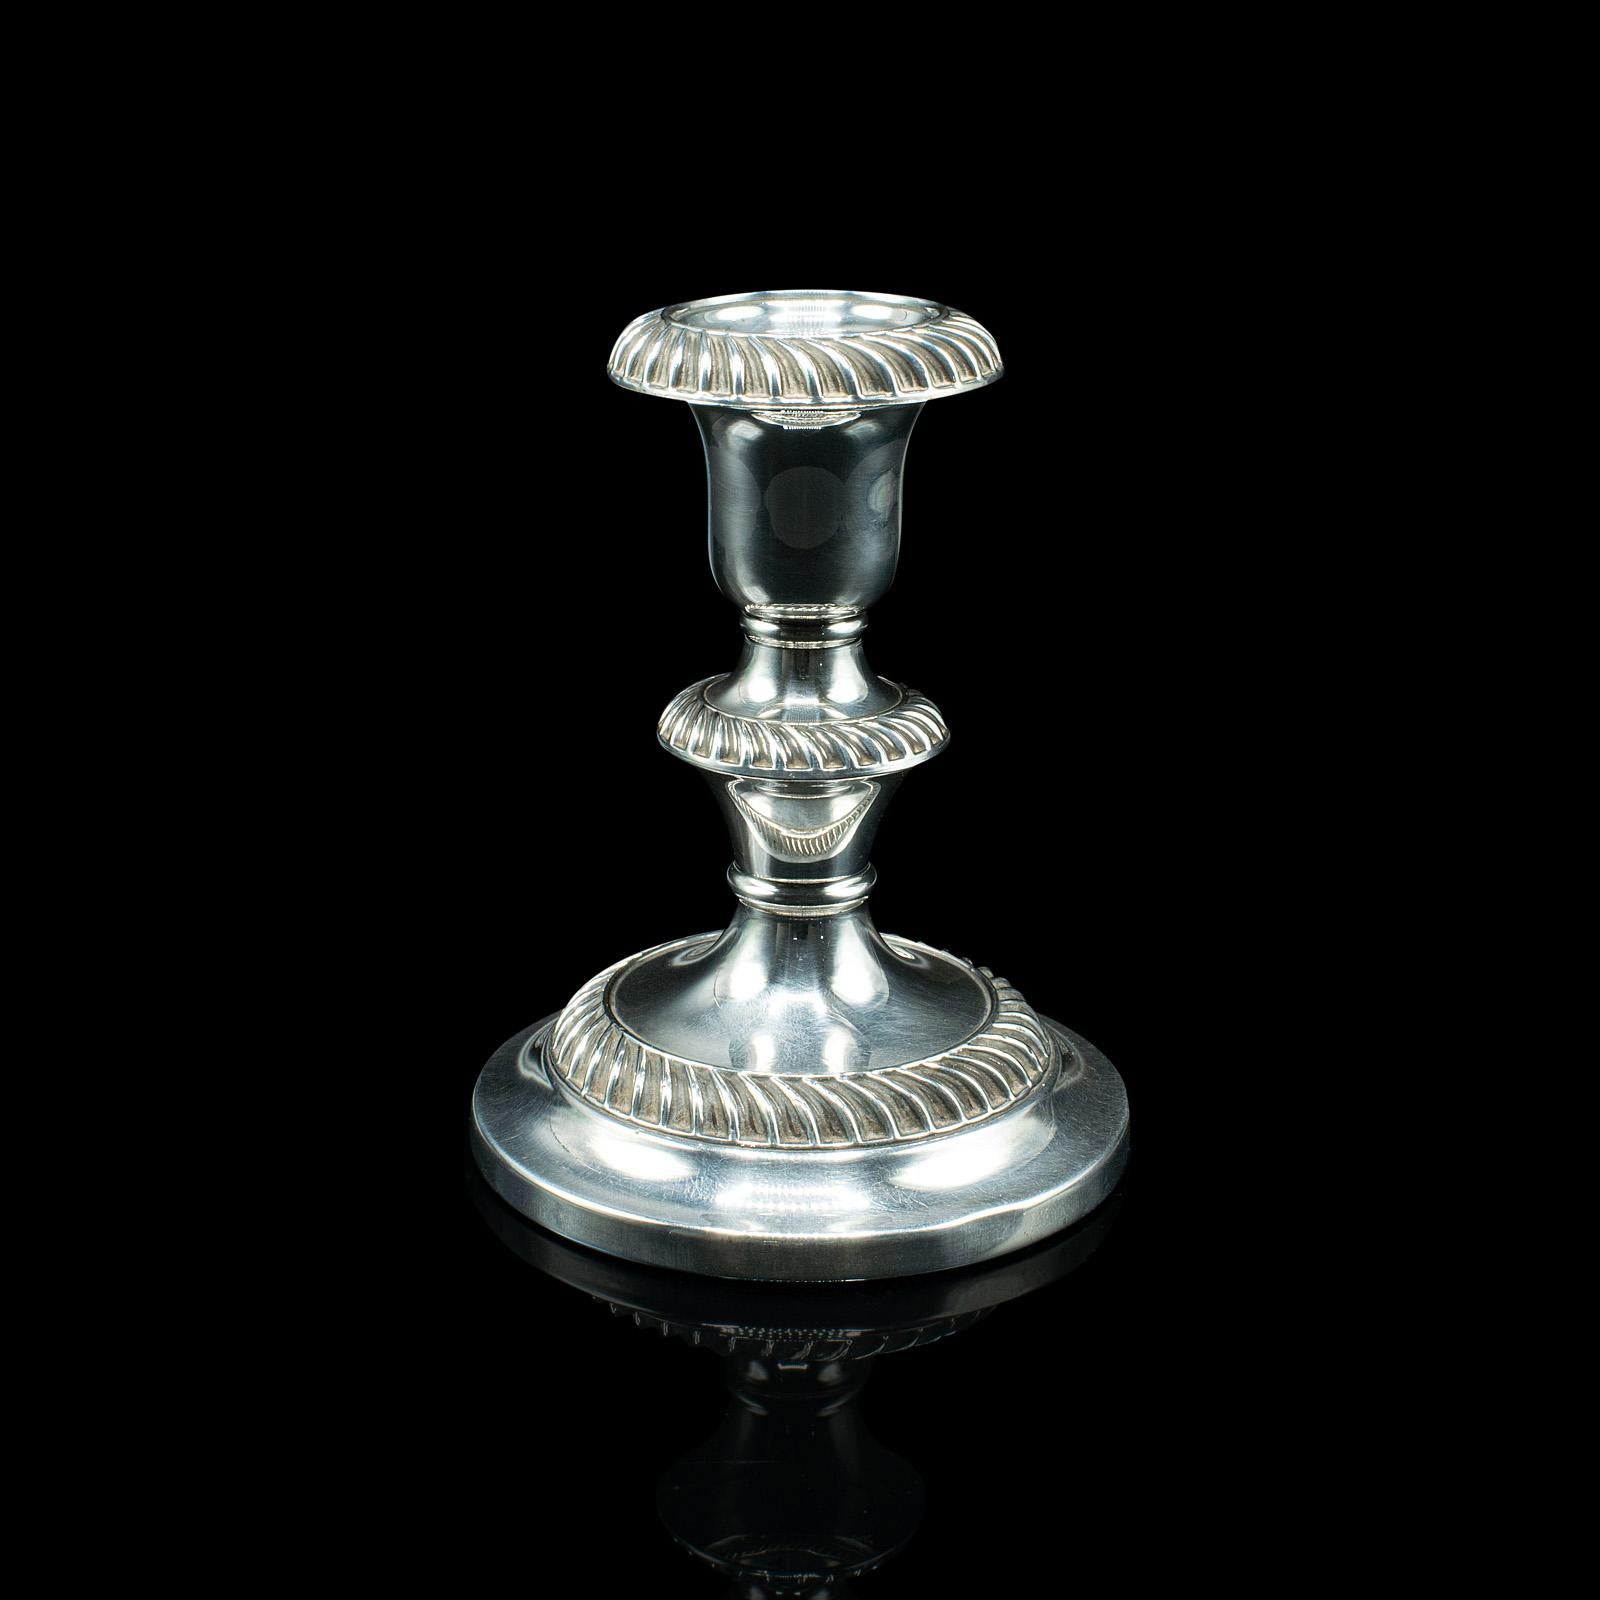 20th Century Pair Of Antique Candlesticks, English, Silver Plate, Candle Sconce, Edwardian For Sale